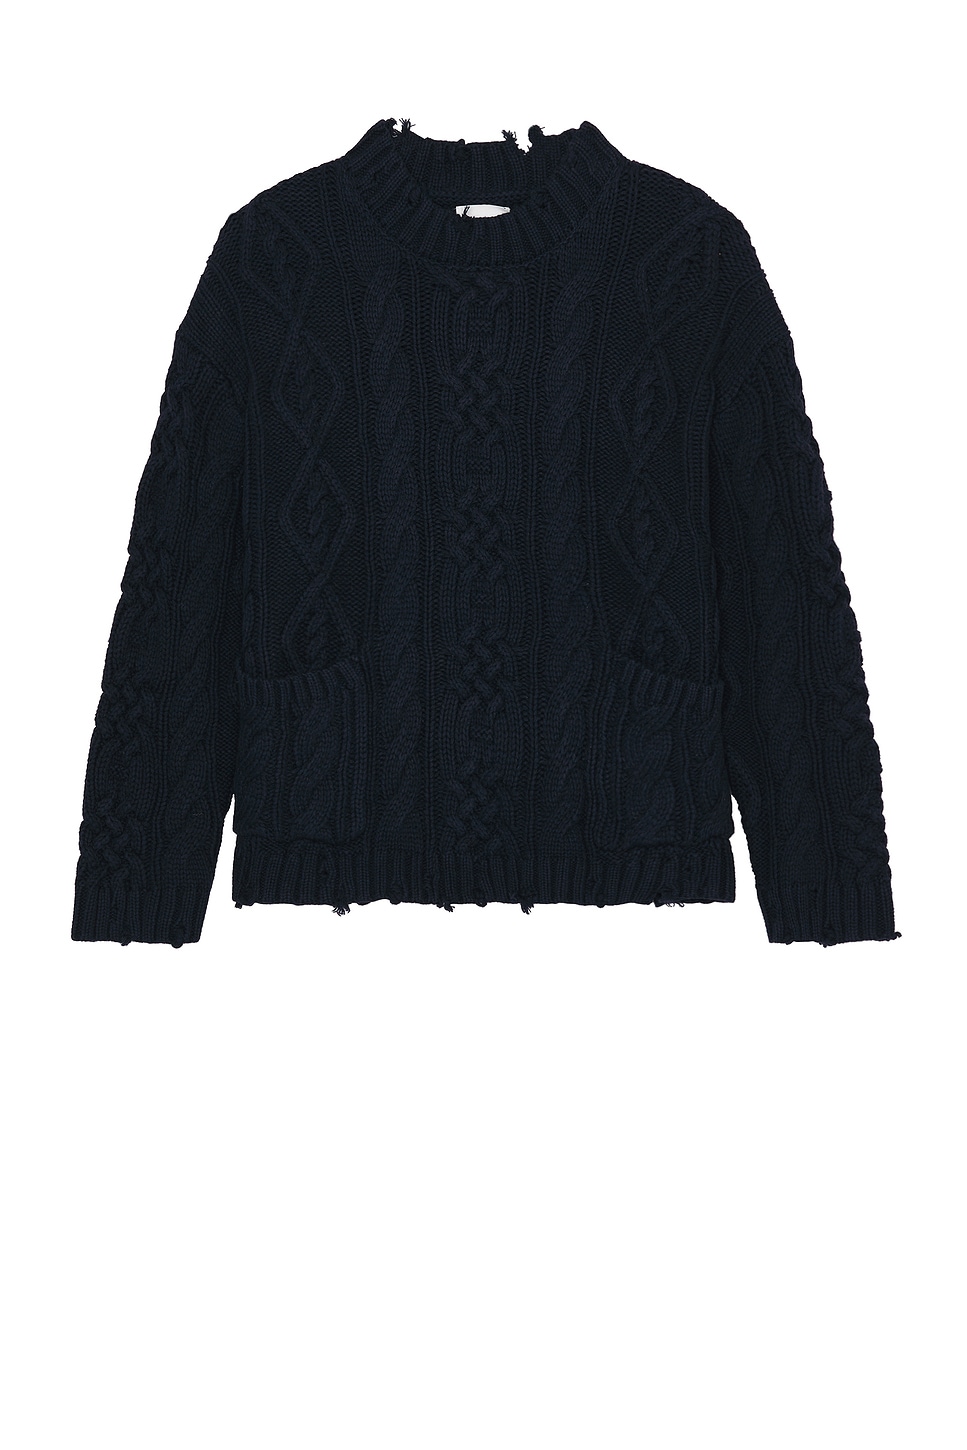 Image 1 of Found Cable Knit Sweater in Navy